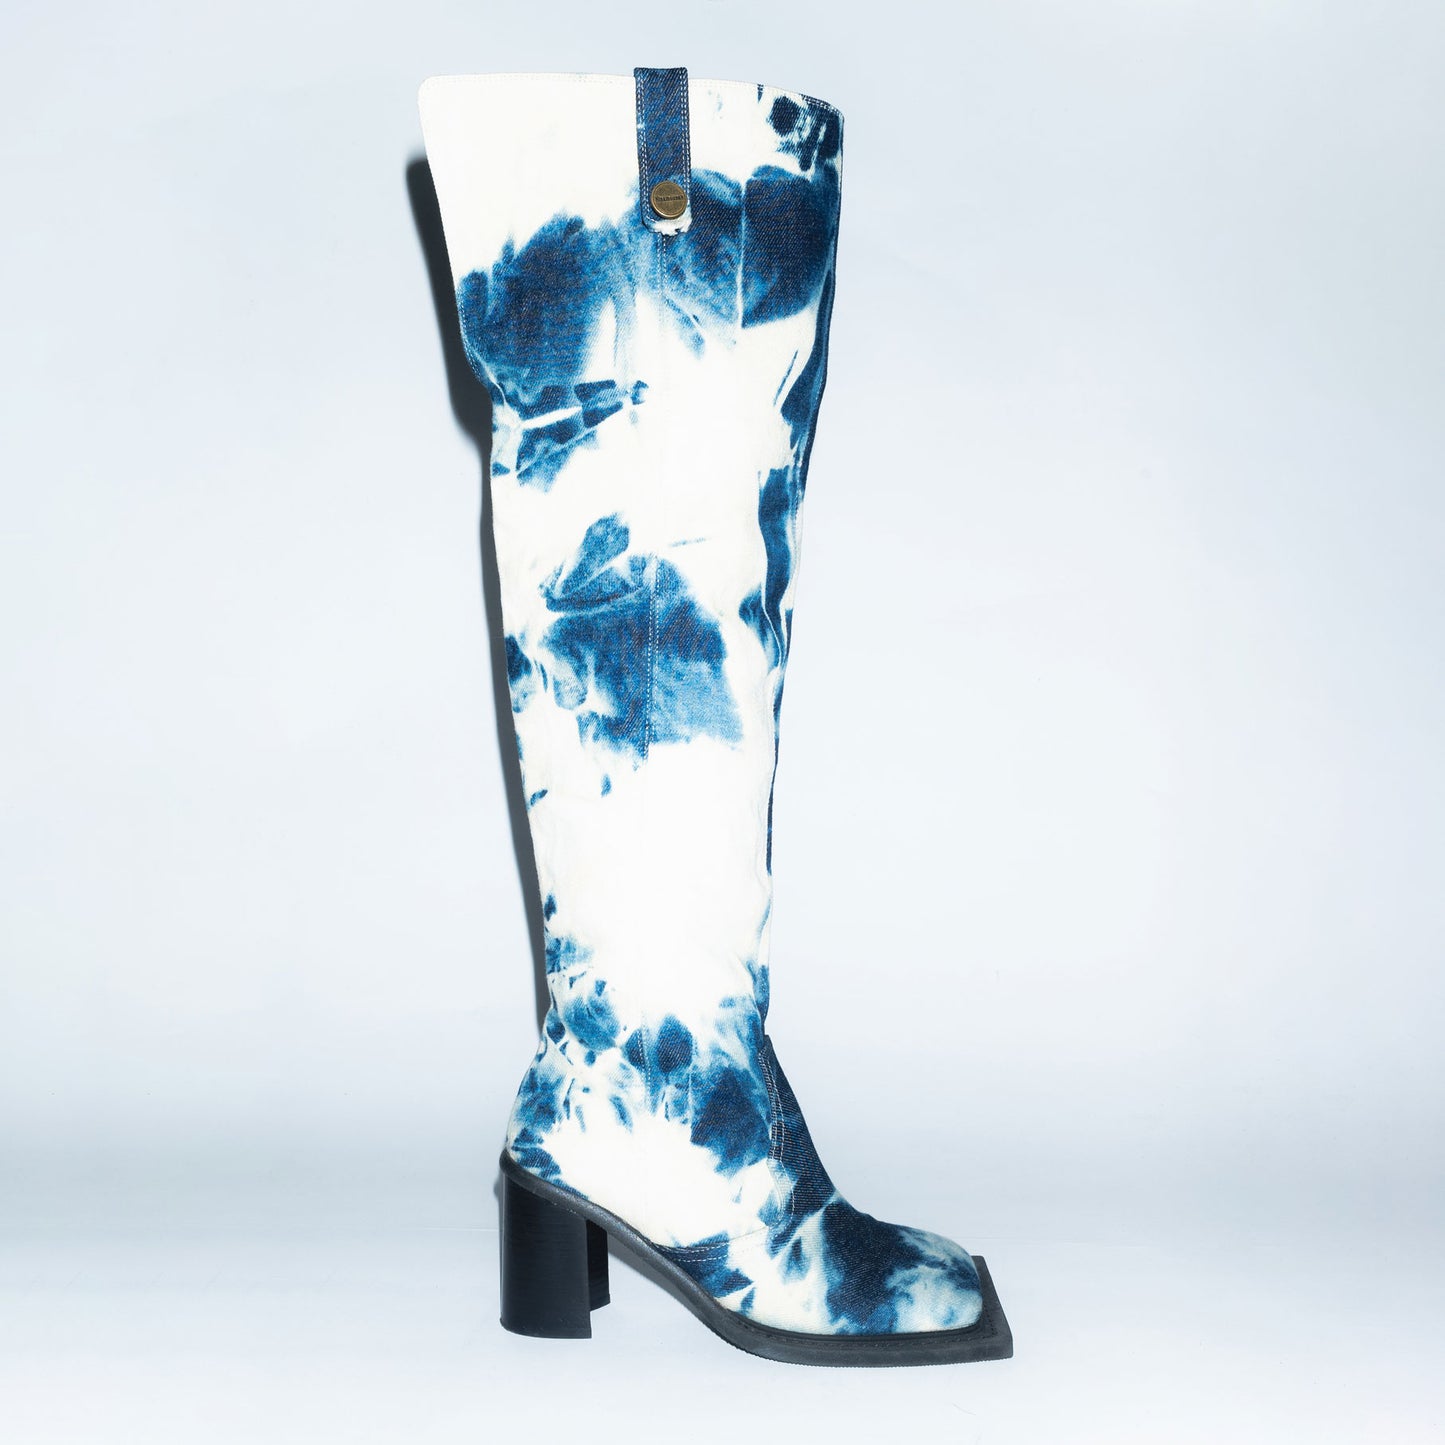 Archive Howling Knee High Boots in Tie Dye Blue Denim